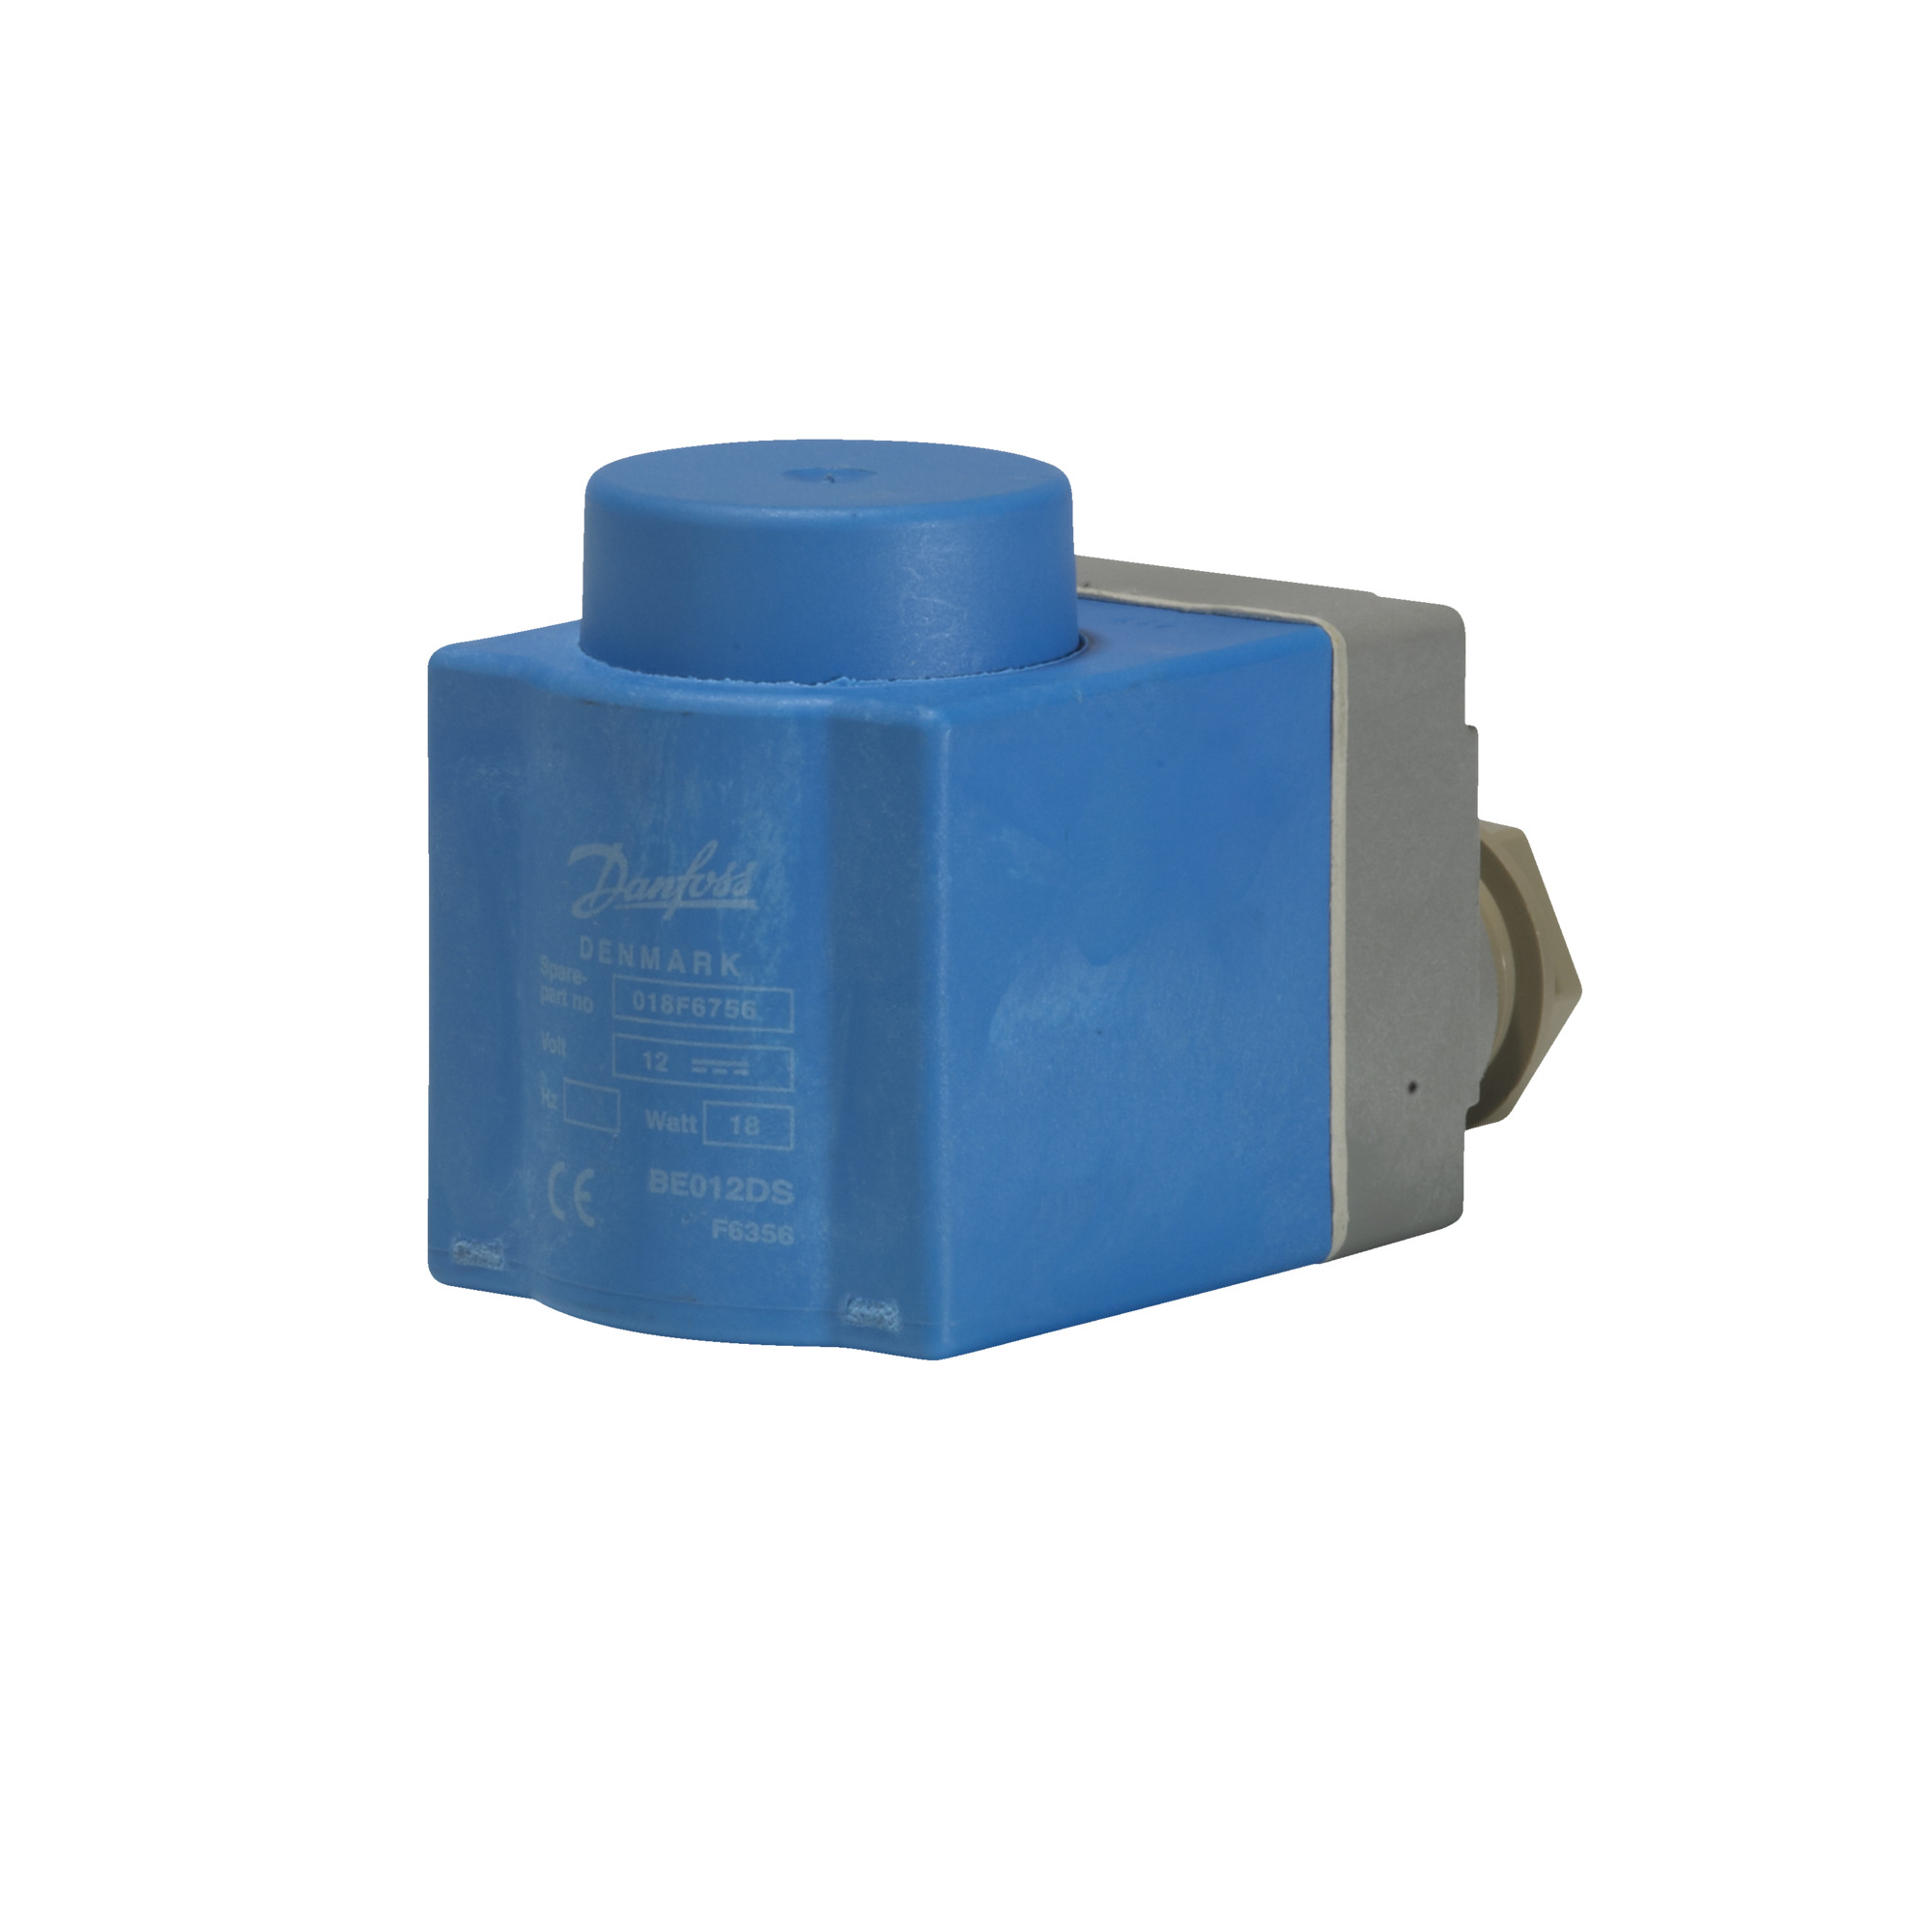 Solenoid coil, BE230AS